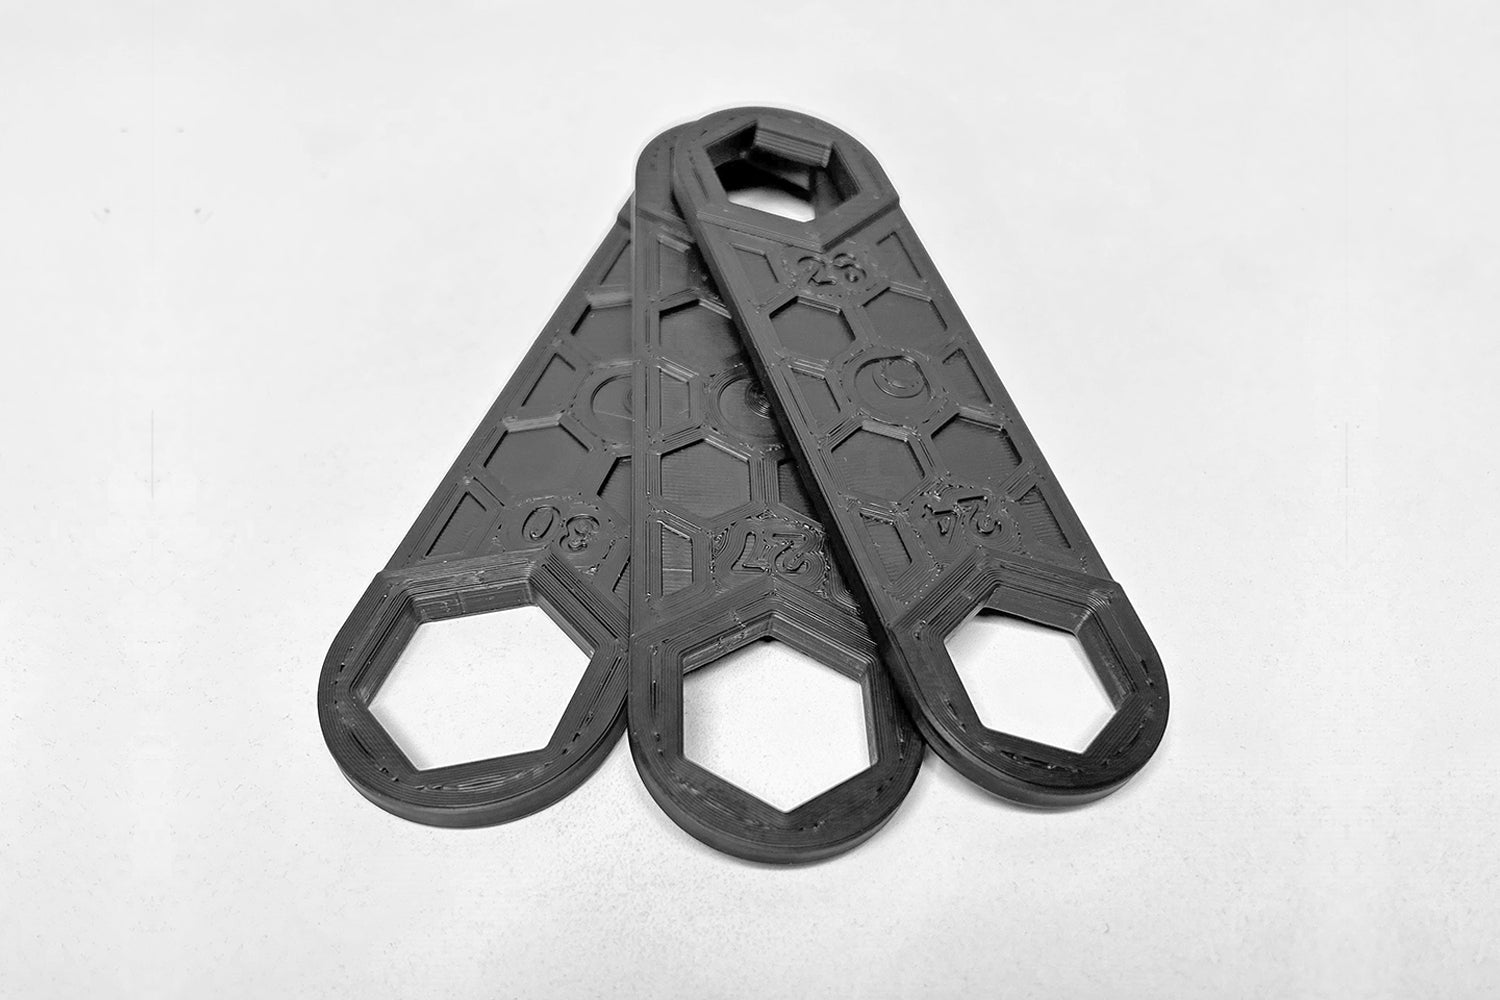 Full Set: Flat Spanners. A must-have 3D printed suspension tools made for the Home Mechanics!